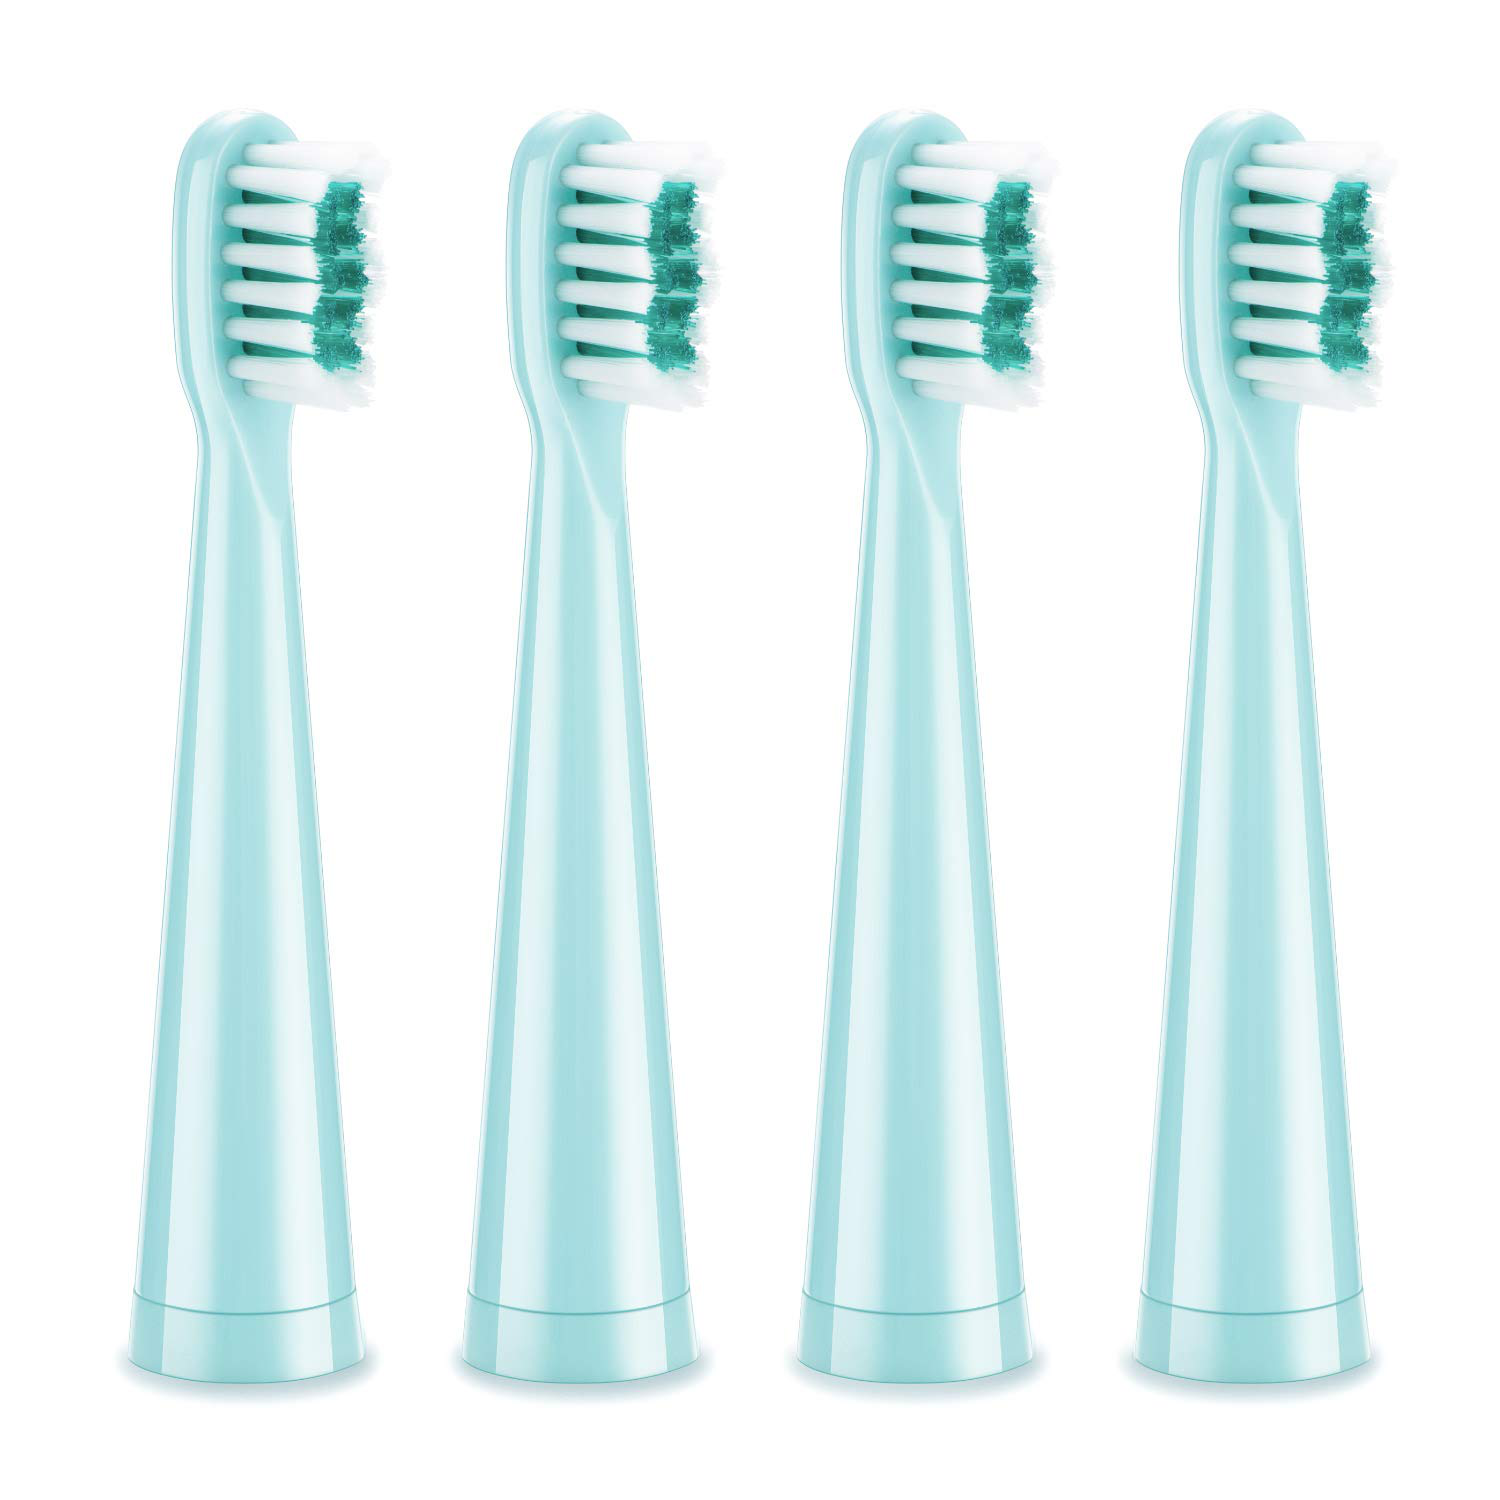 Toothbrush Replacement Heads - 7X More Plaque Removal, 3D Curved Soft Bristles, Comfortable & Efficient Clean Teeth, Perfect for Kid Small Mouth